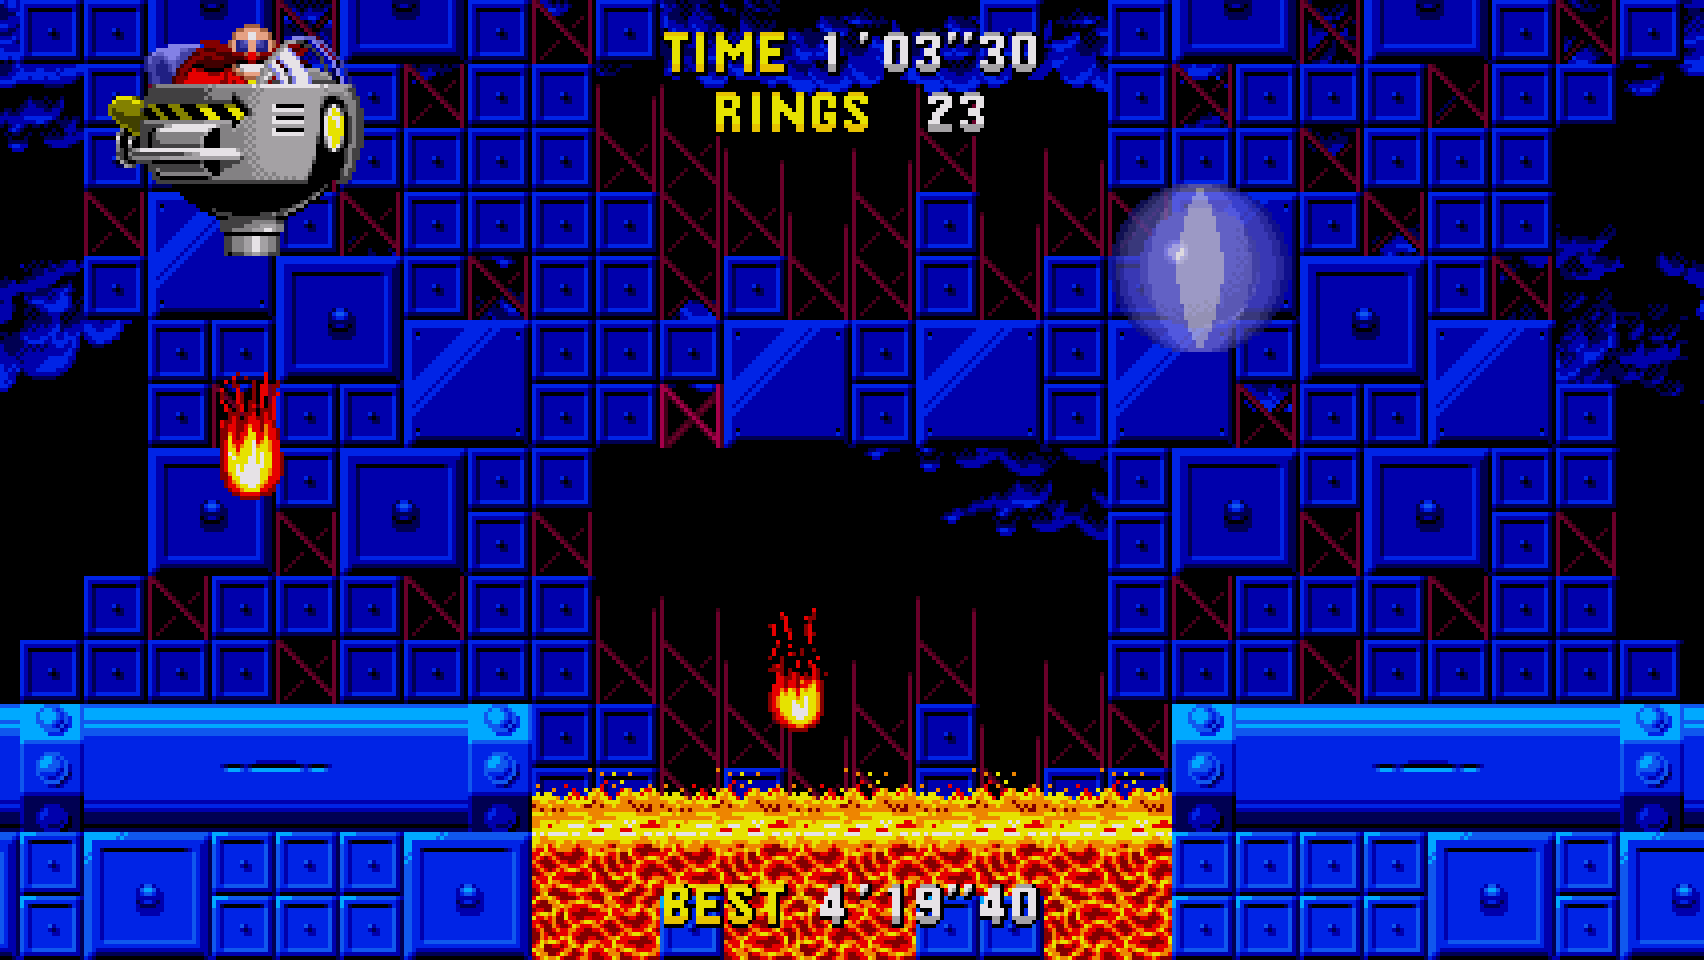 Sonic 1 Forever: Wood Zone Plus (Initial Release) ✪ Full Game